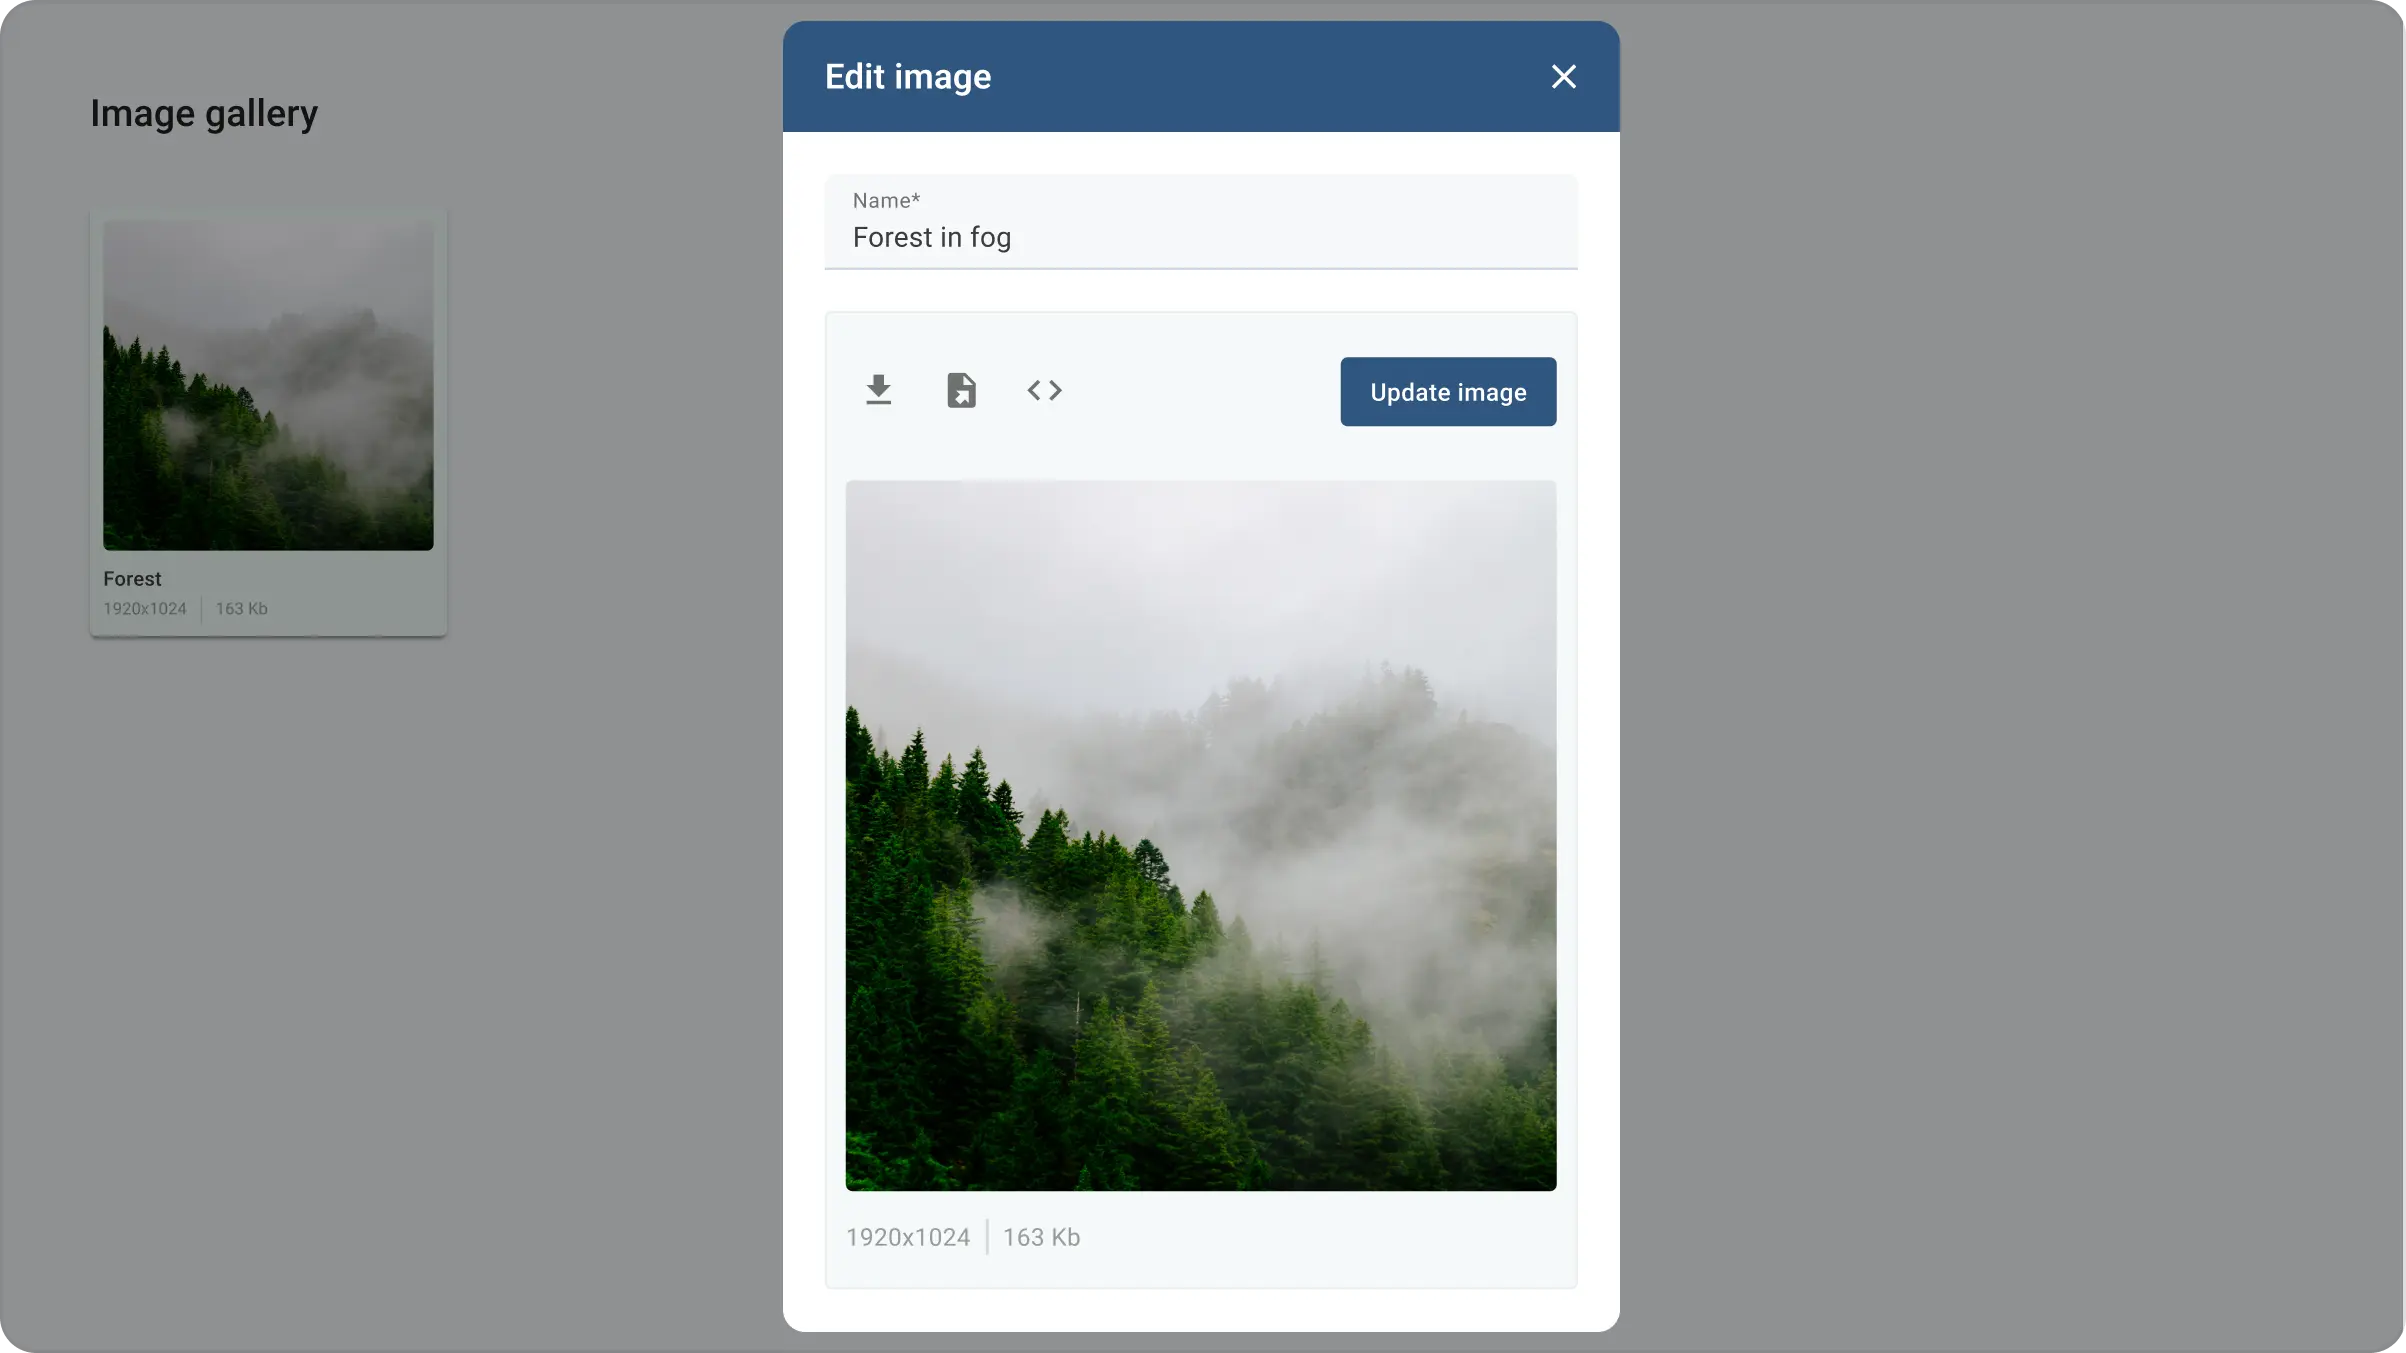 Thingsboard edit image form with option to change name and loaded photo